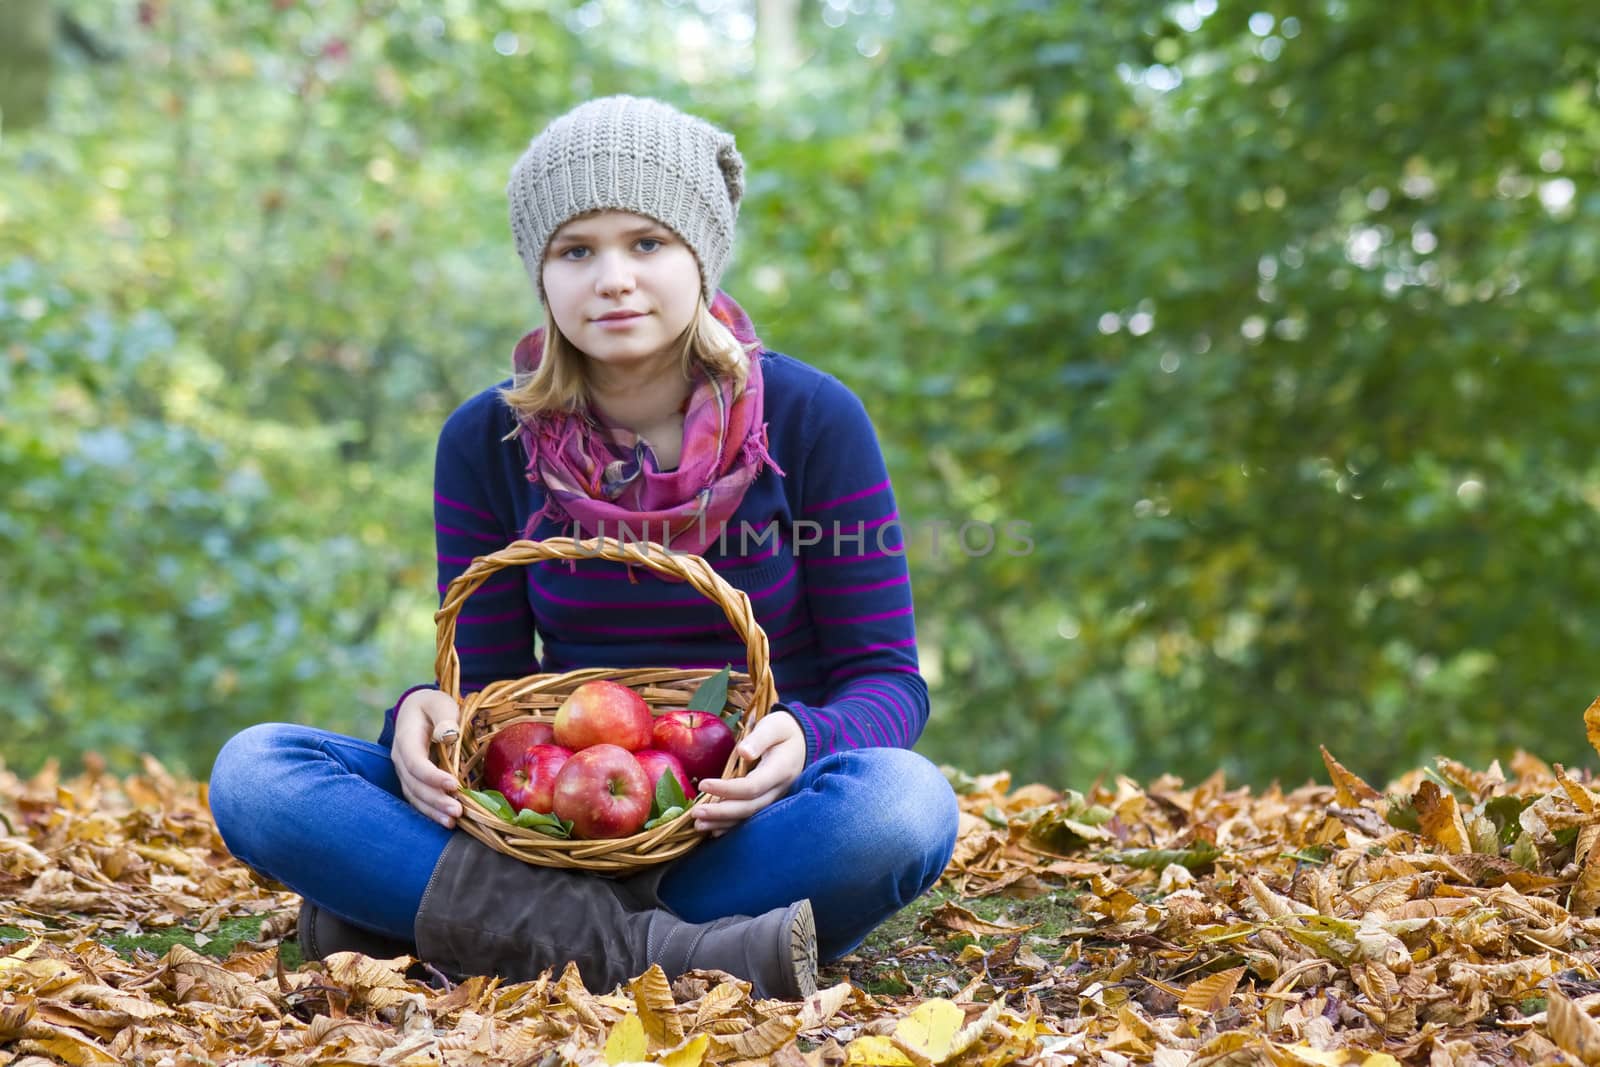 young girl with basket of apples in autumn garden